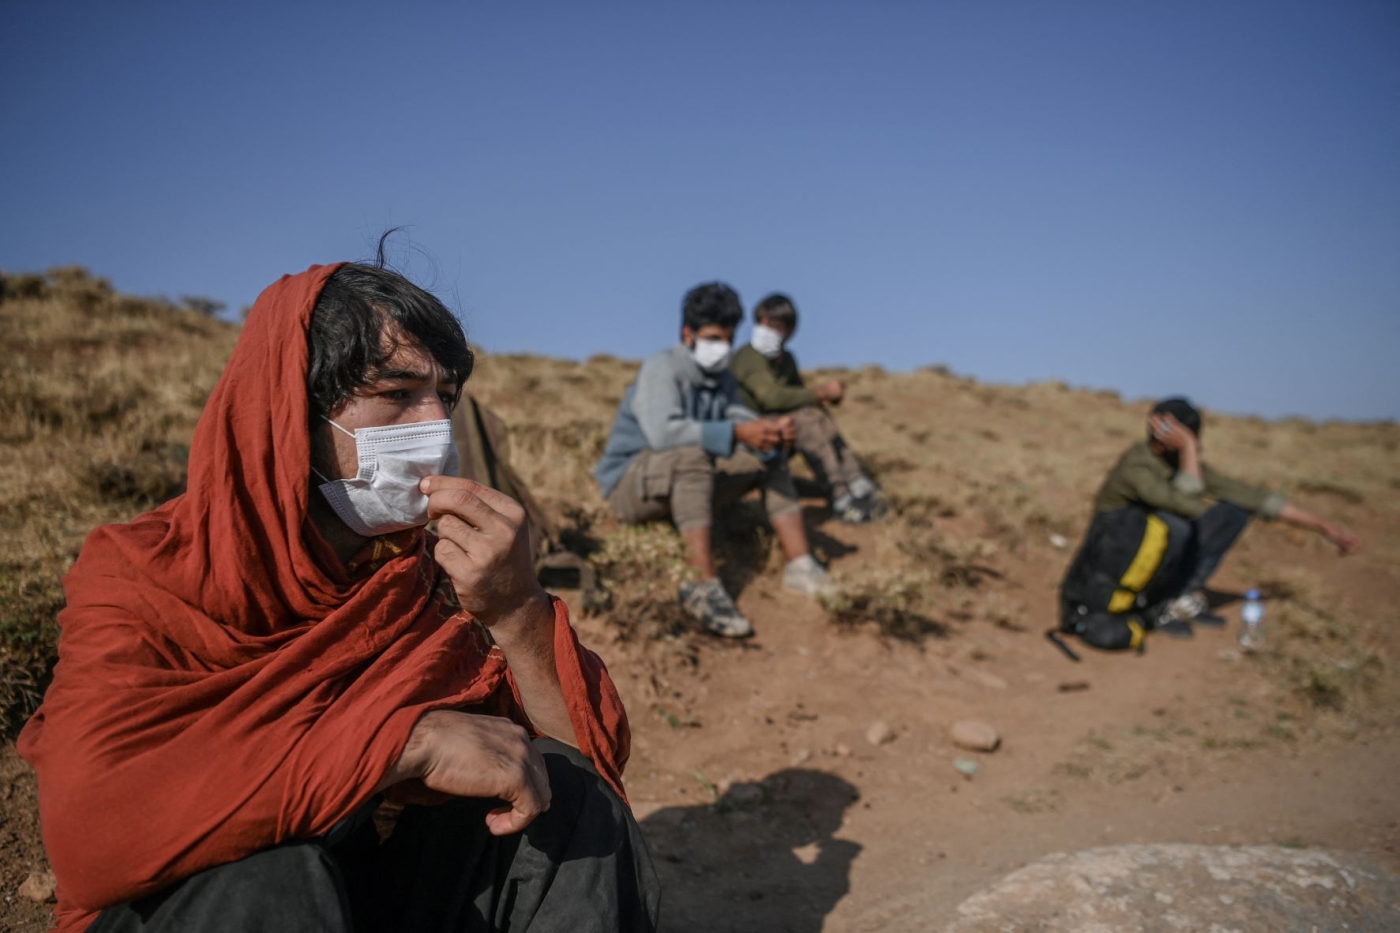 Afghan migrants rest while waiting for transport by smugglers after crossing the Iran-Turkish border in Tatvan, on the western shores of Lake Van, eastern Turkey, on 15 August 2021 (AFP)